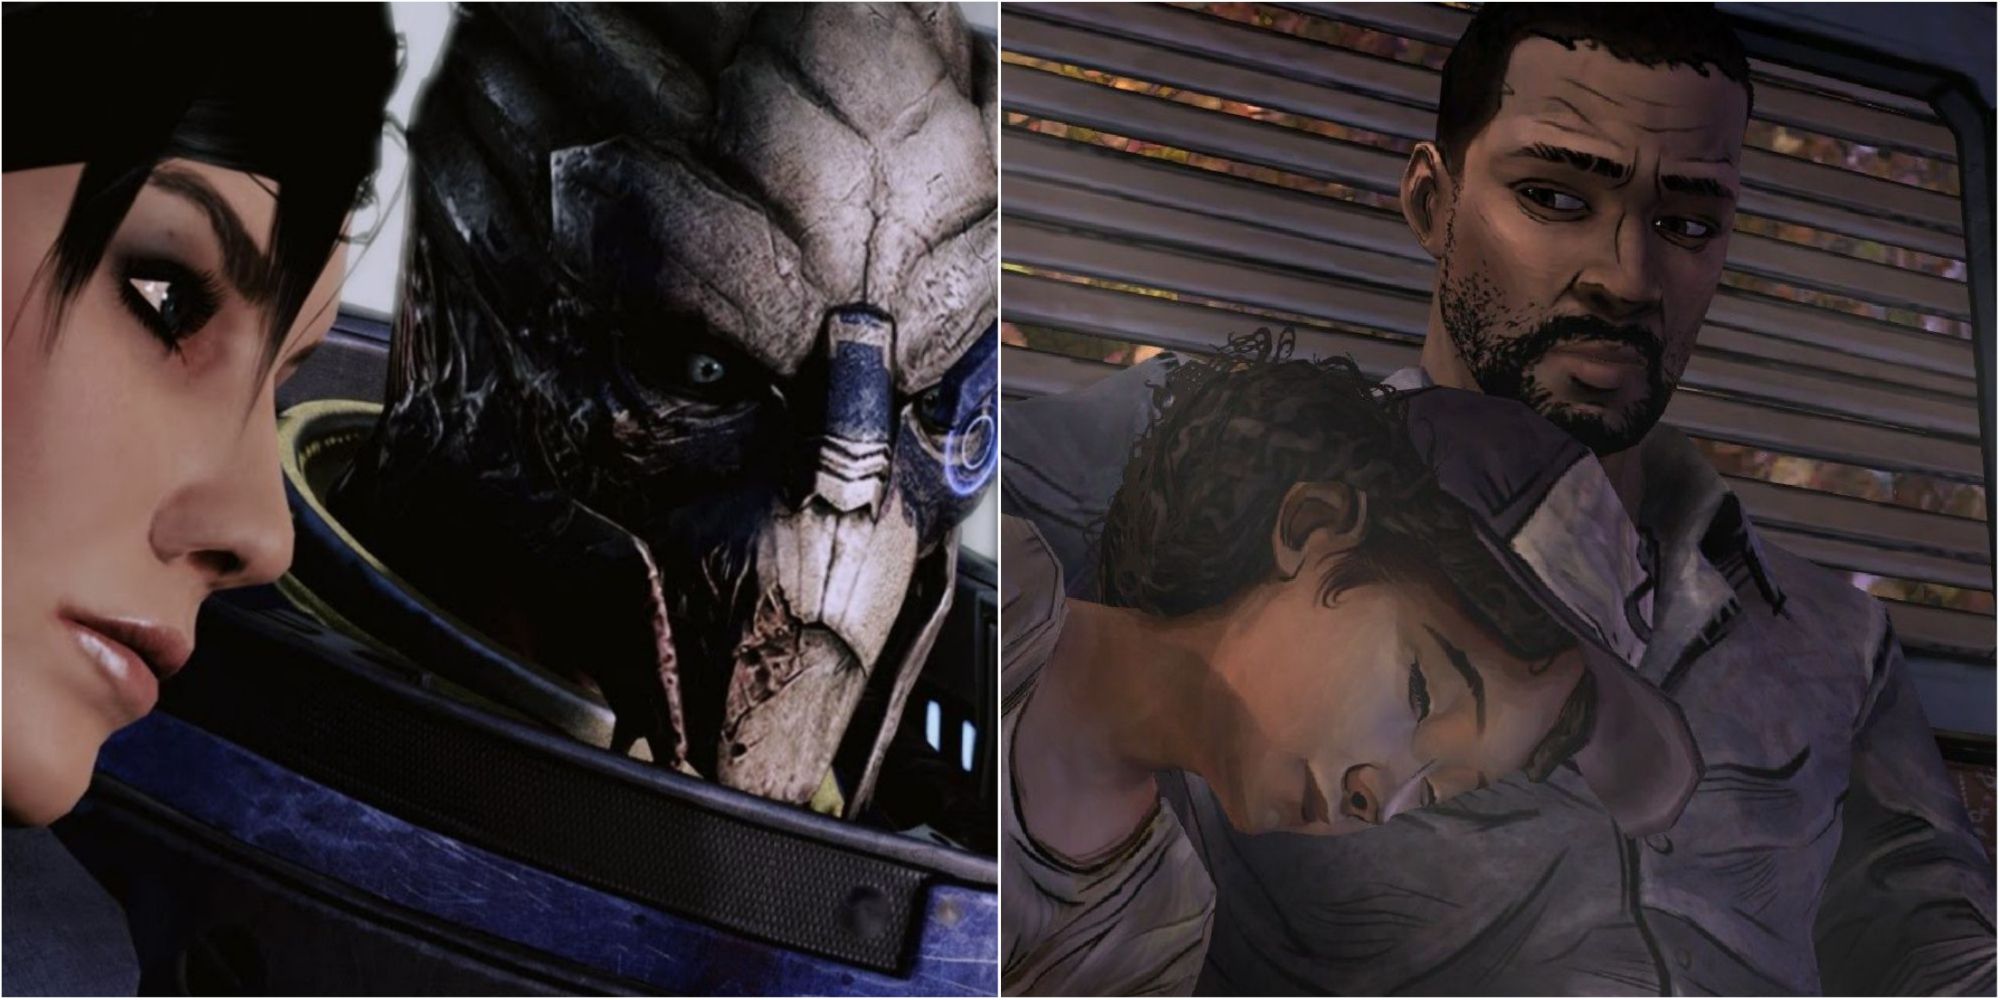 Iconic Mentor And Student Featured Split Image Of Mass Effect and The Walking Dead